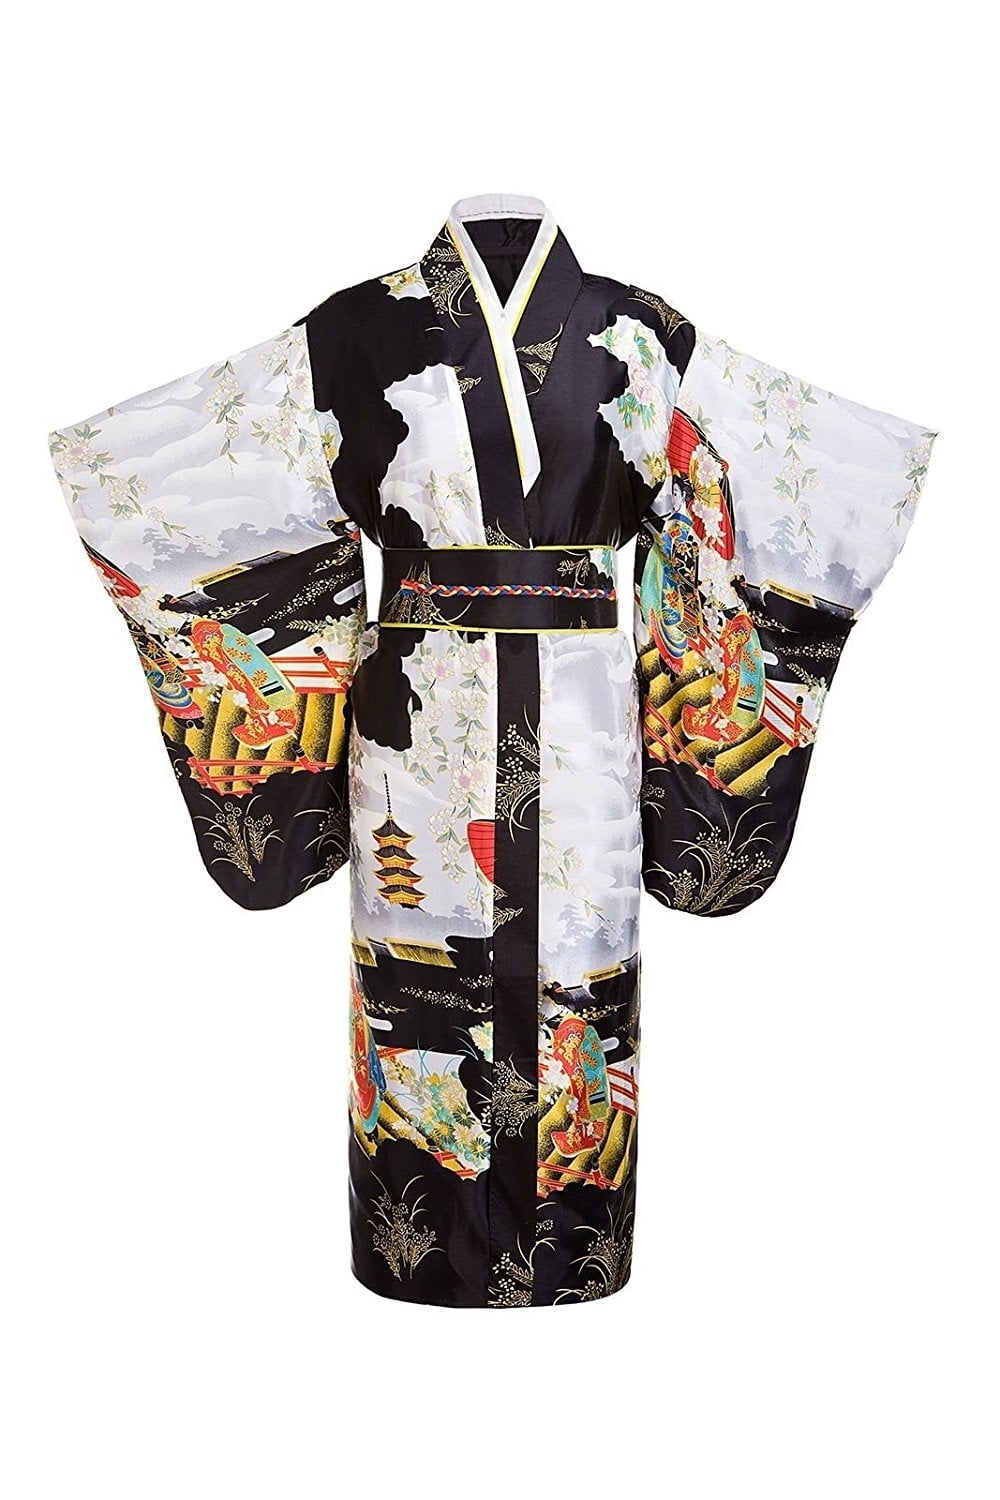 Thy Collectibles - THY COLLECTIBLES Women's Silk Traditional Japanese